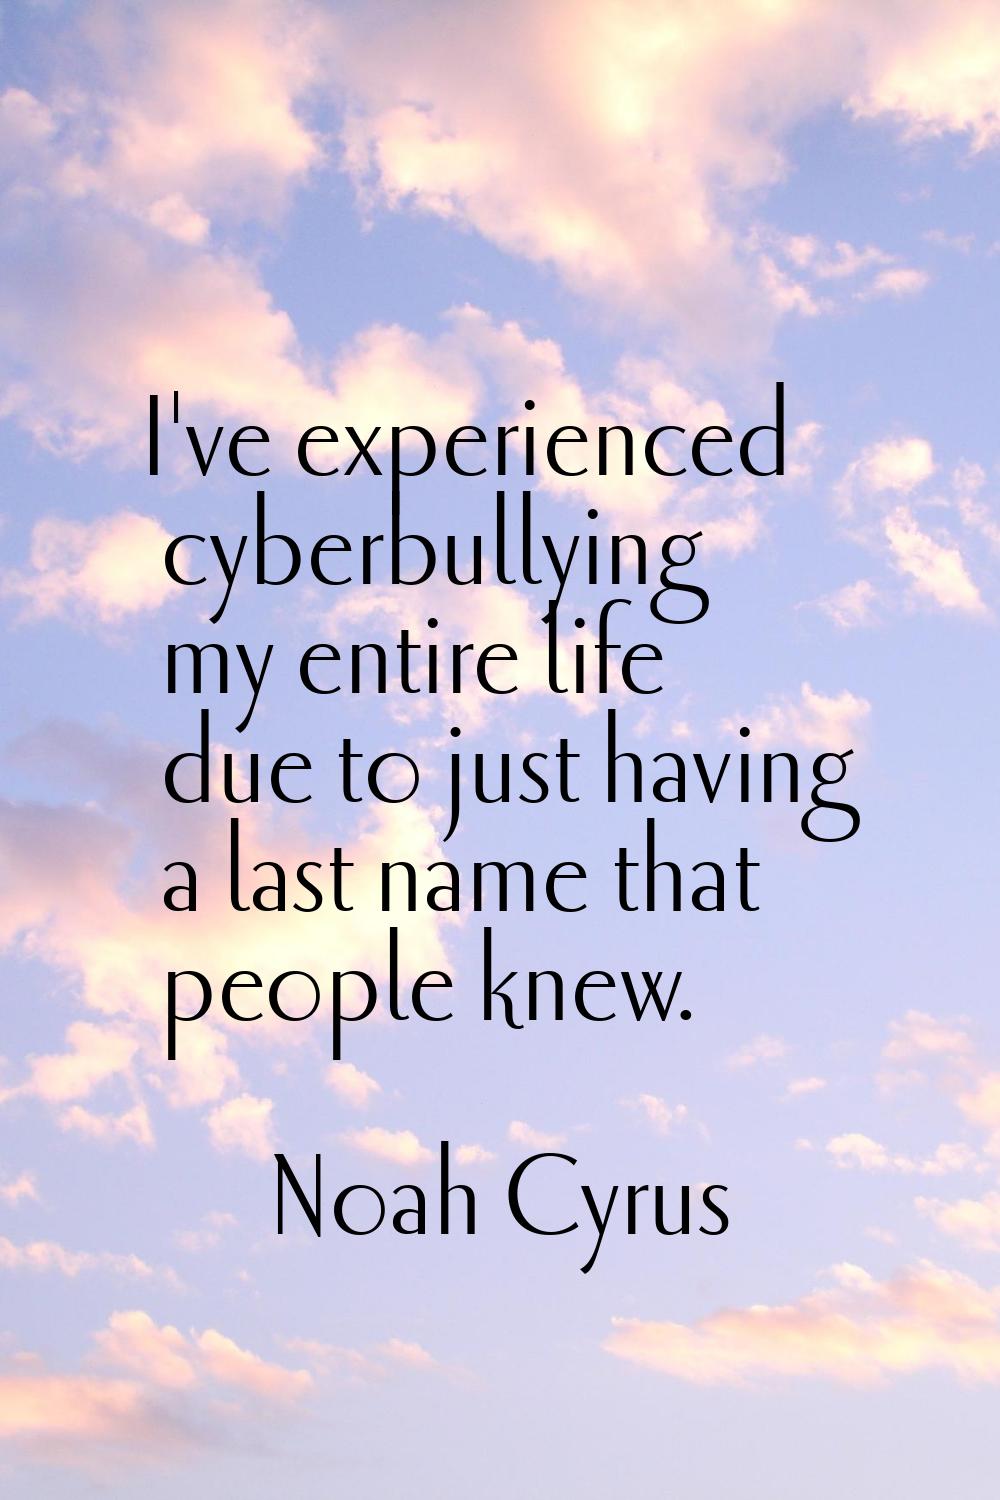 I've experienced cyberbullying my entire life due to just having a last name that people knew.